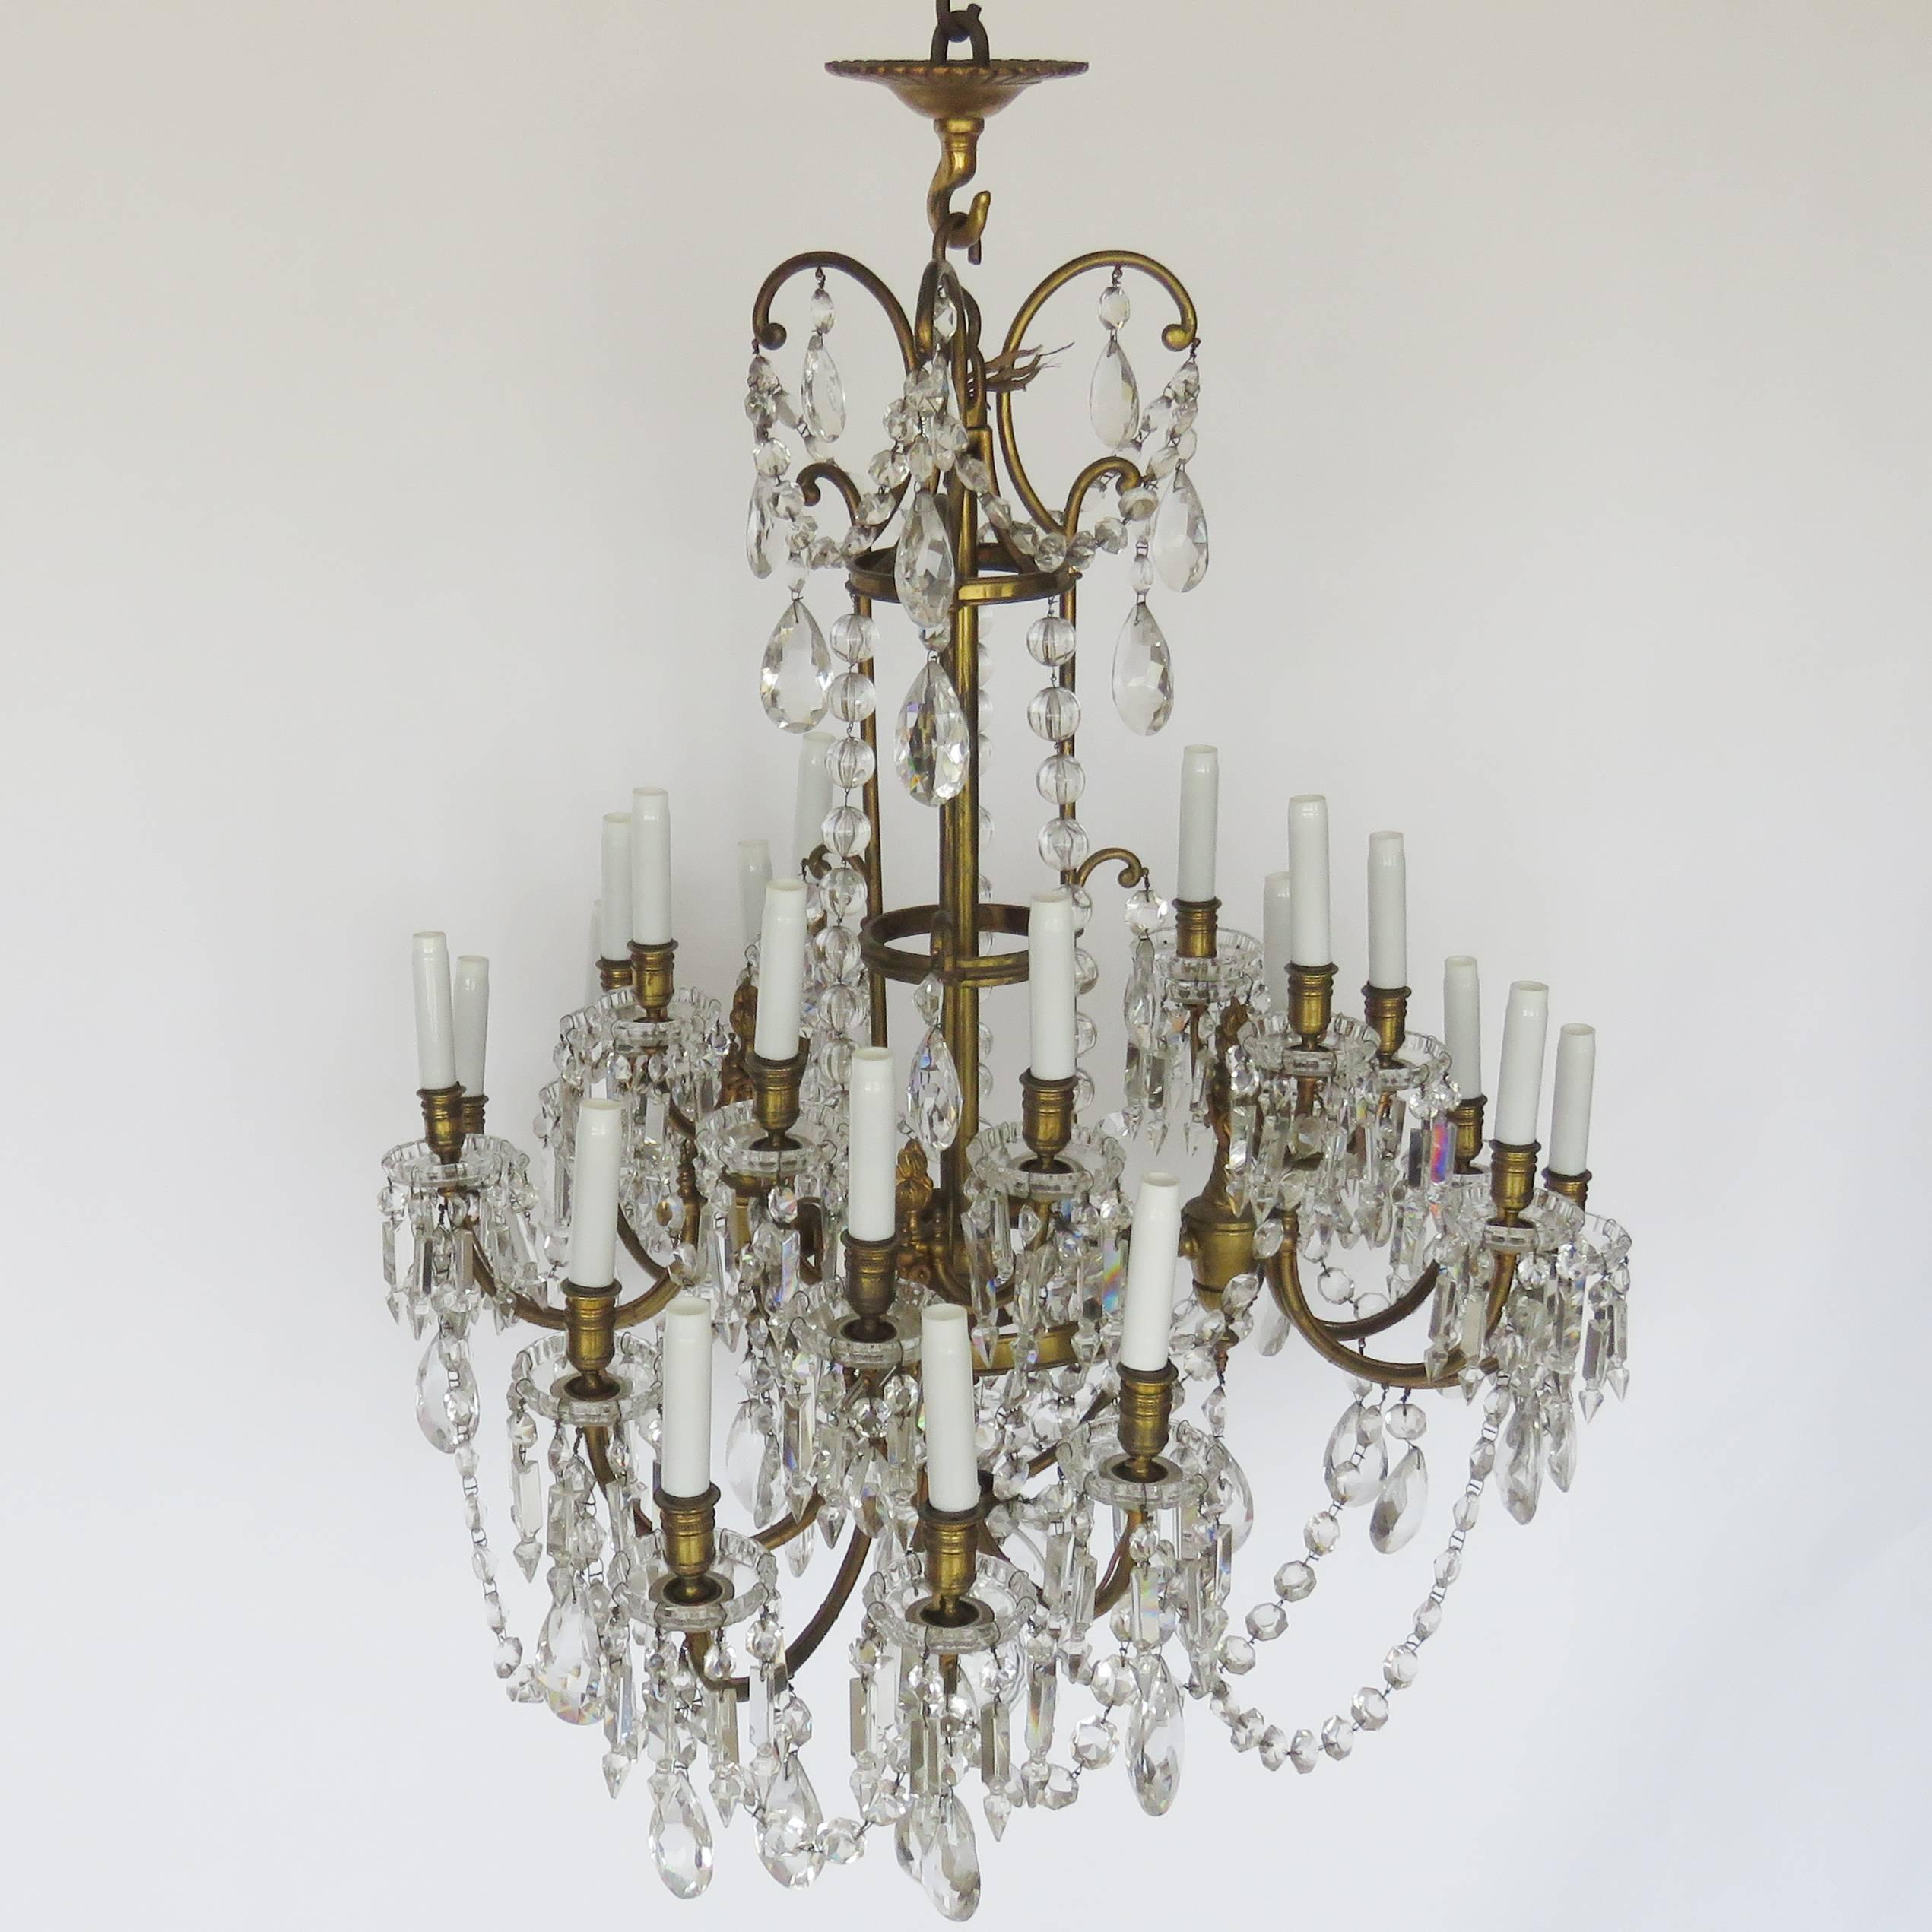 Louis Philippe 19th Century Baccarat Bronze and Glass Chandelier, 21 Lights